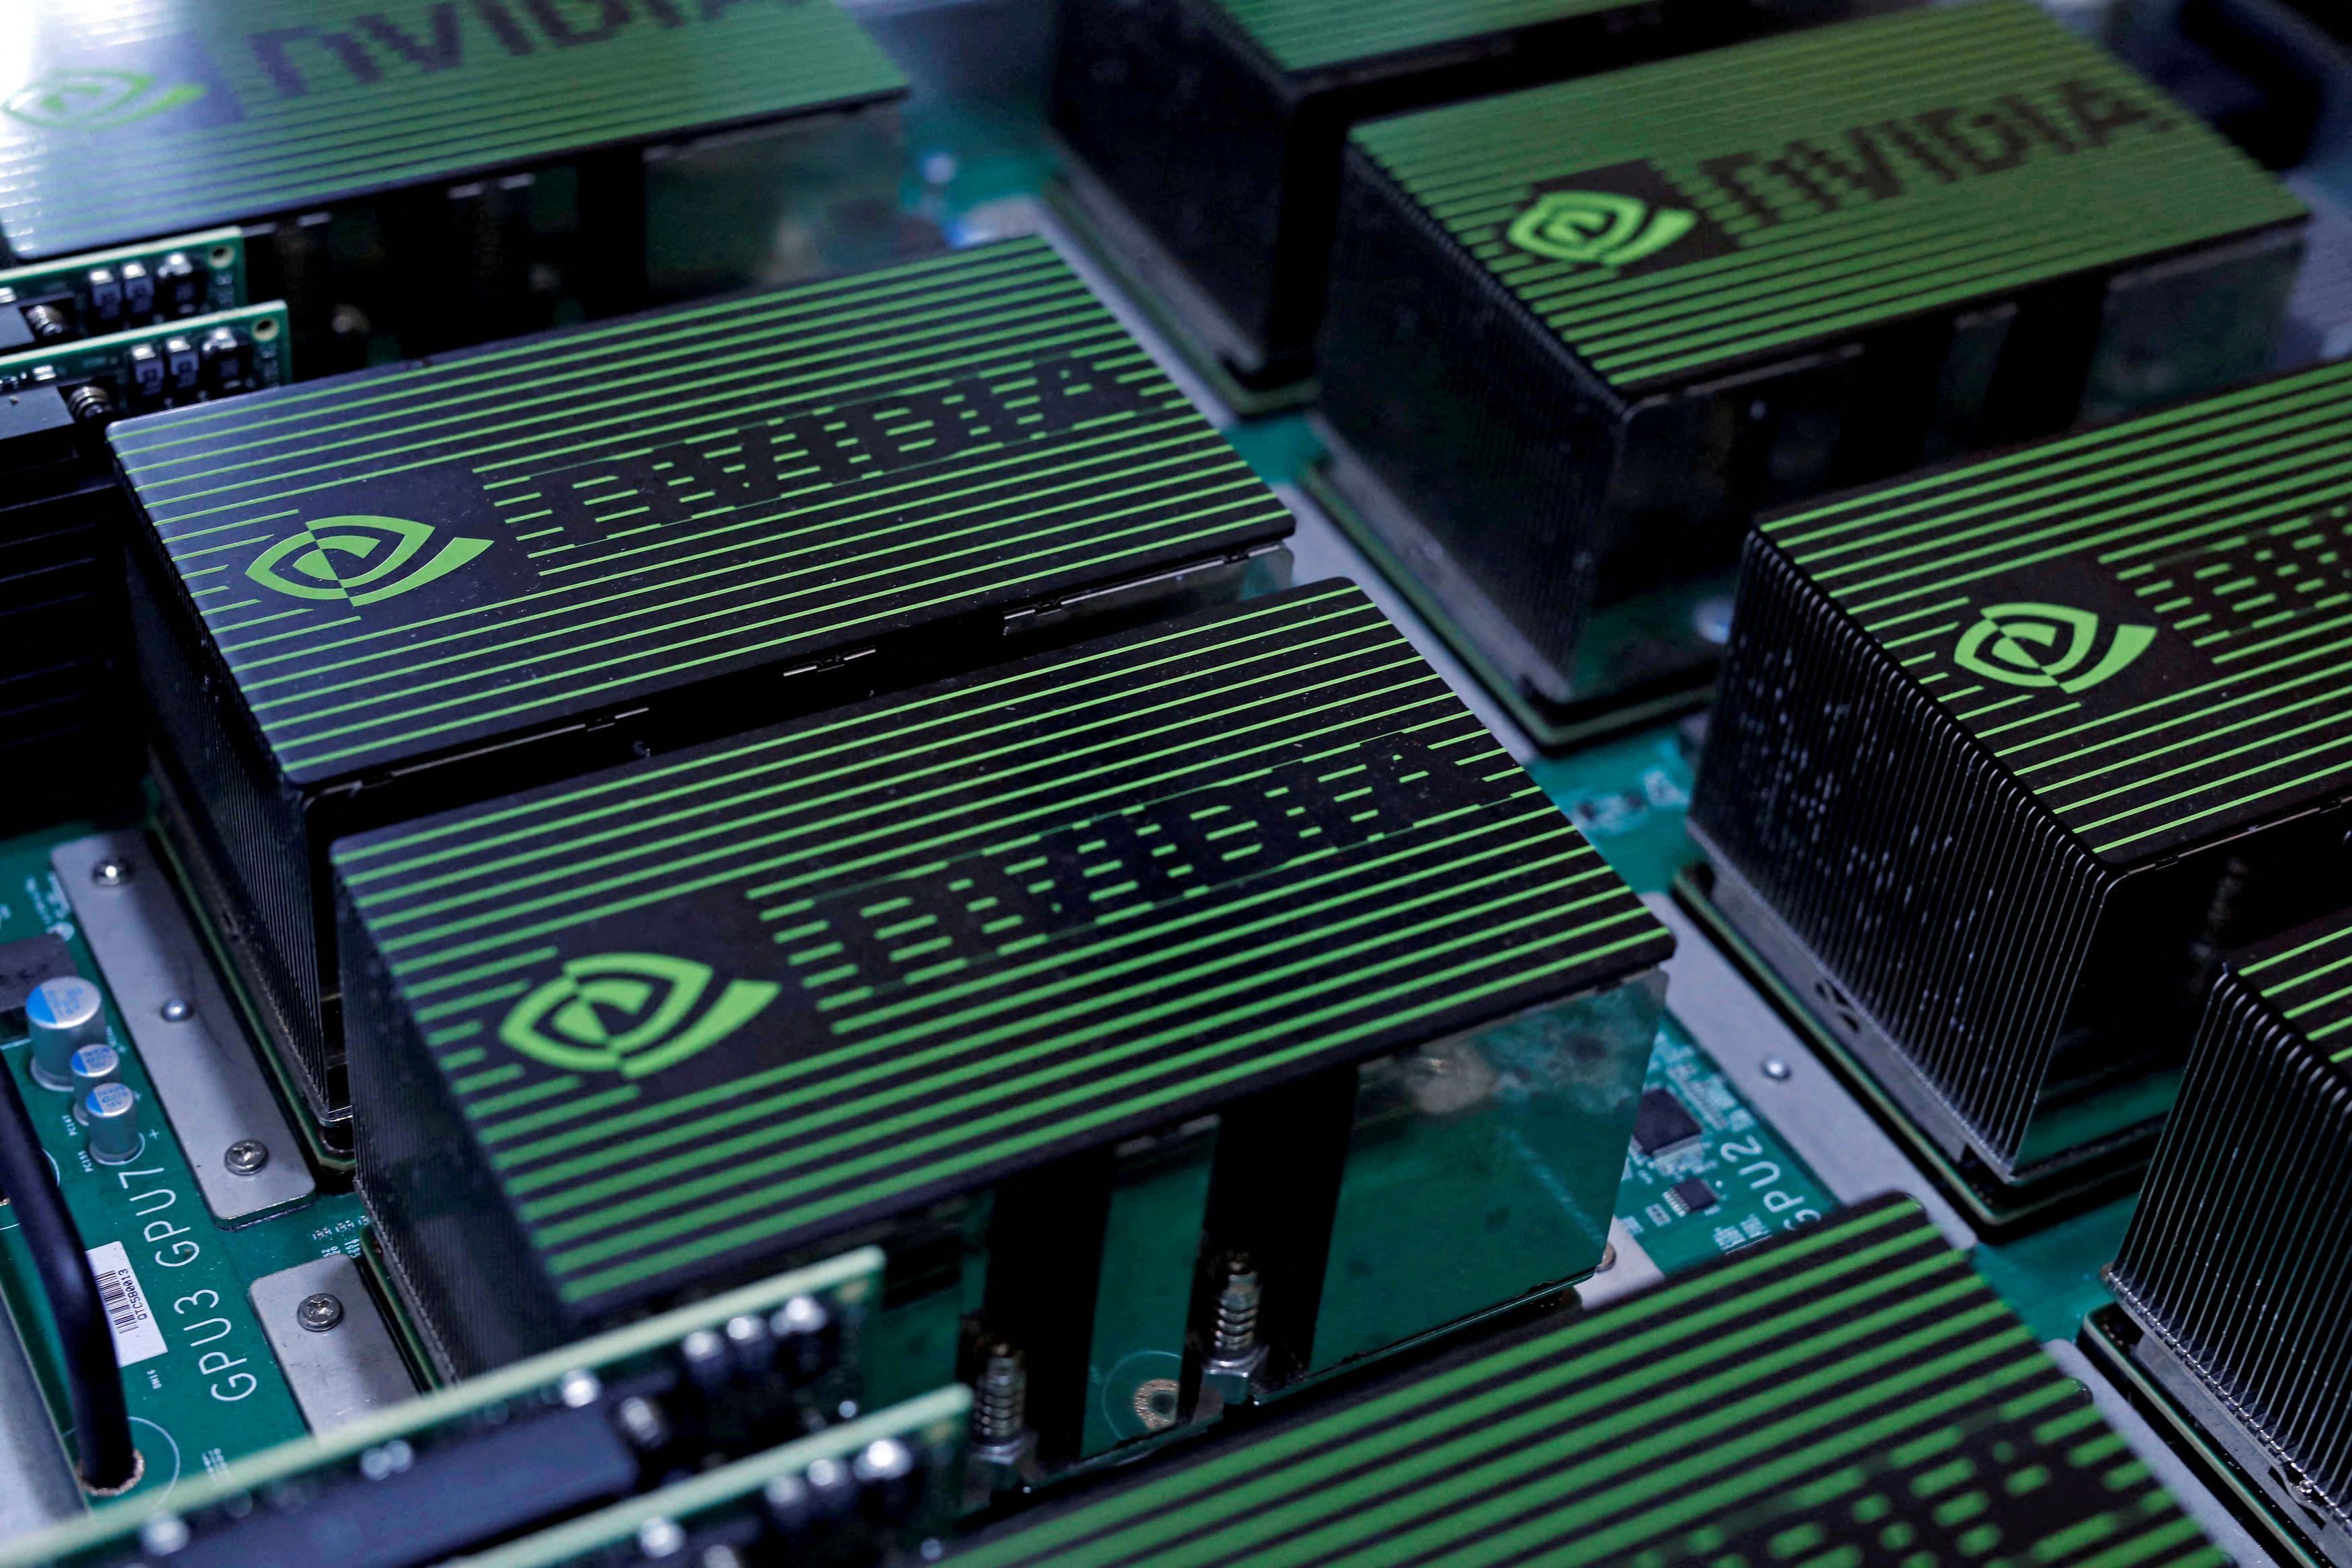 Nvidia's quarter fails to excite but offers enough hope that October's bottom can hold